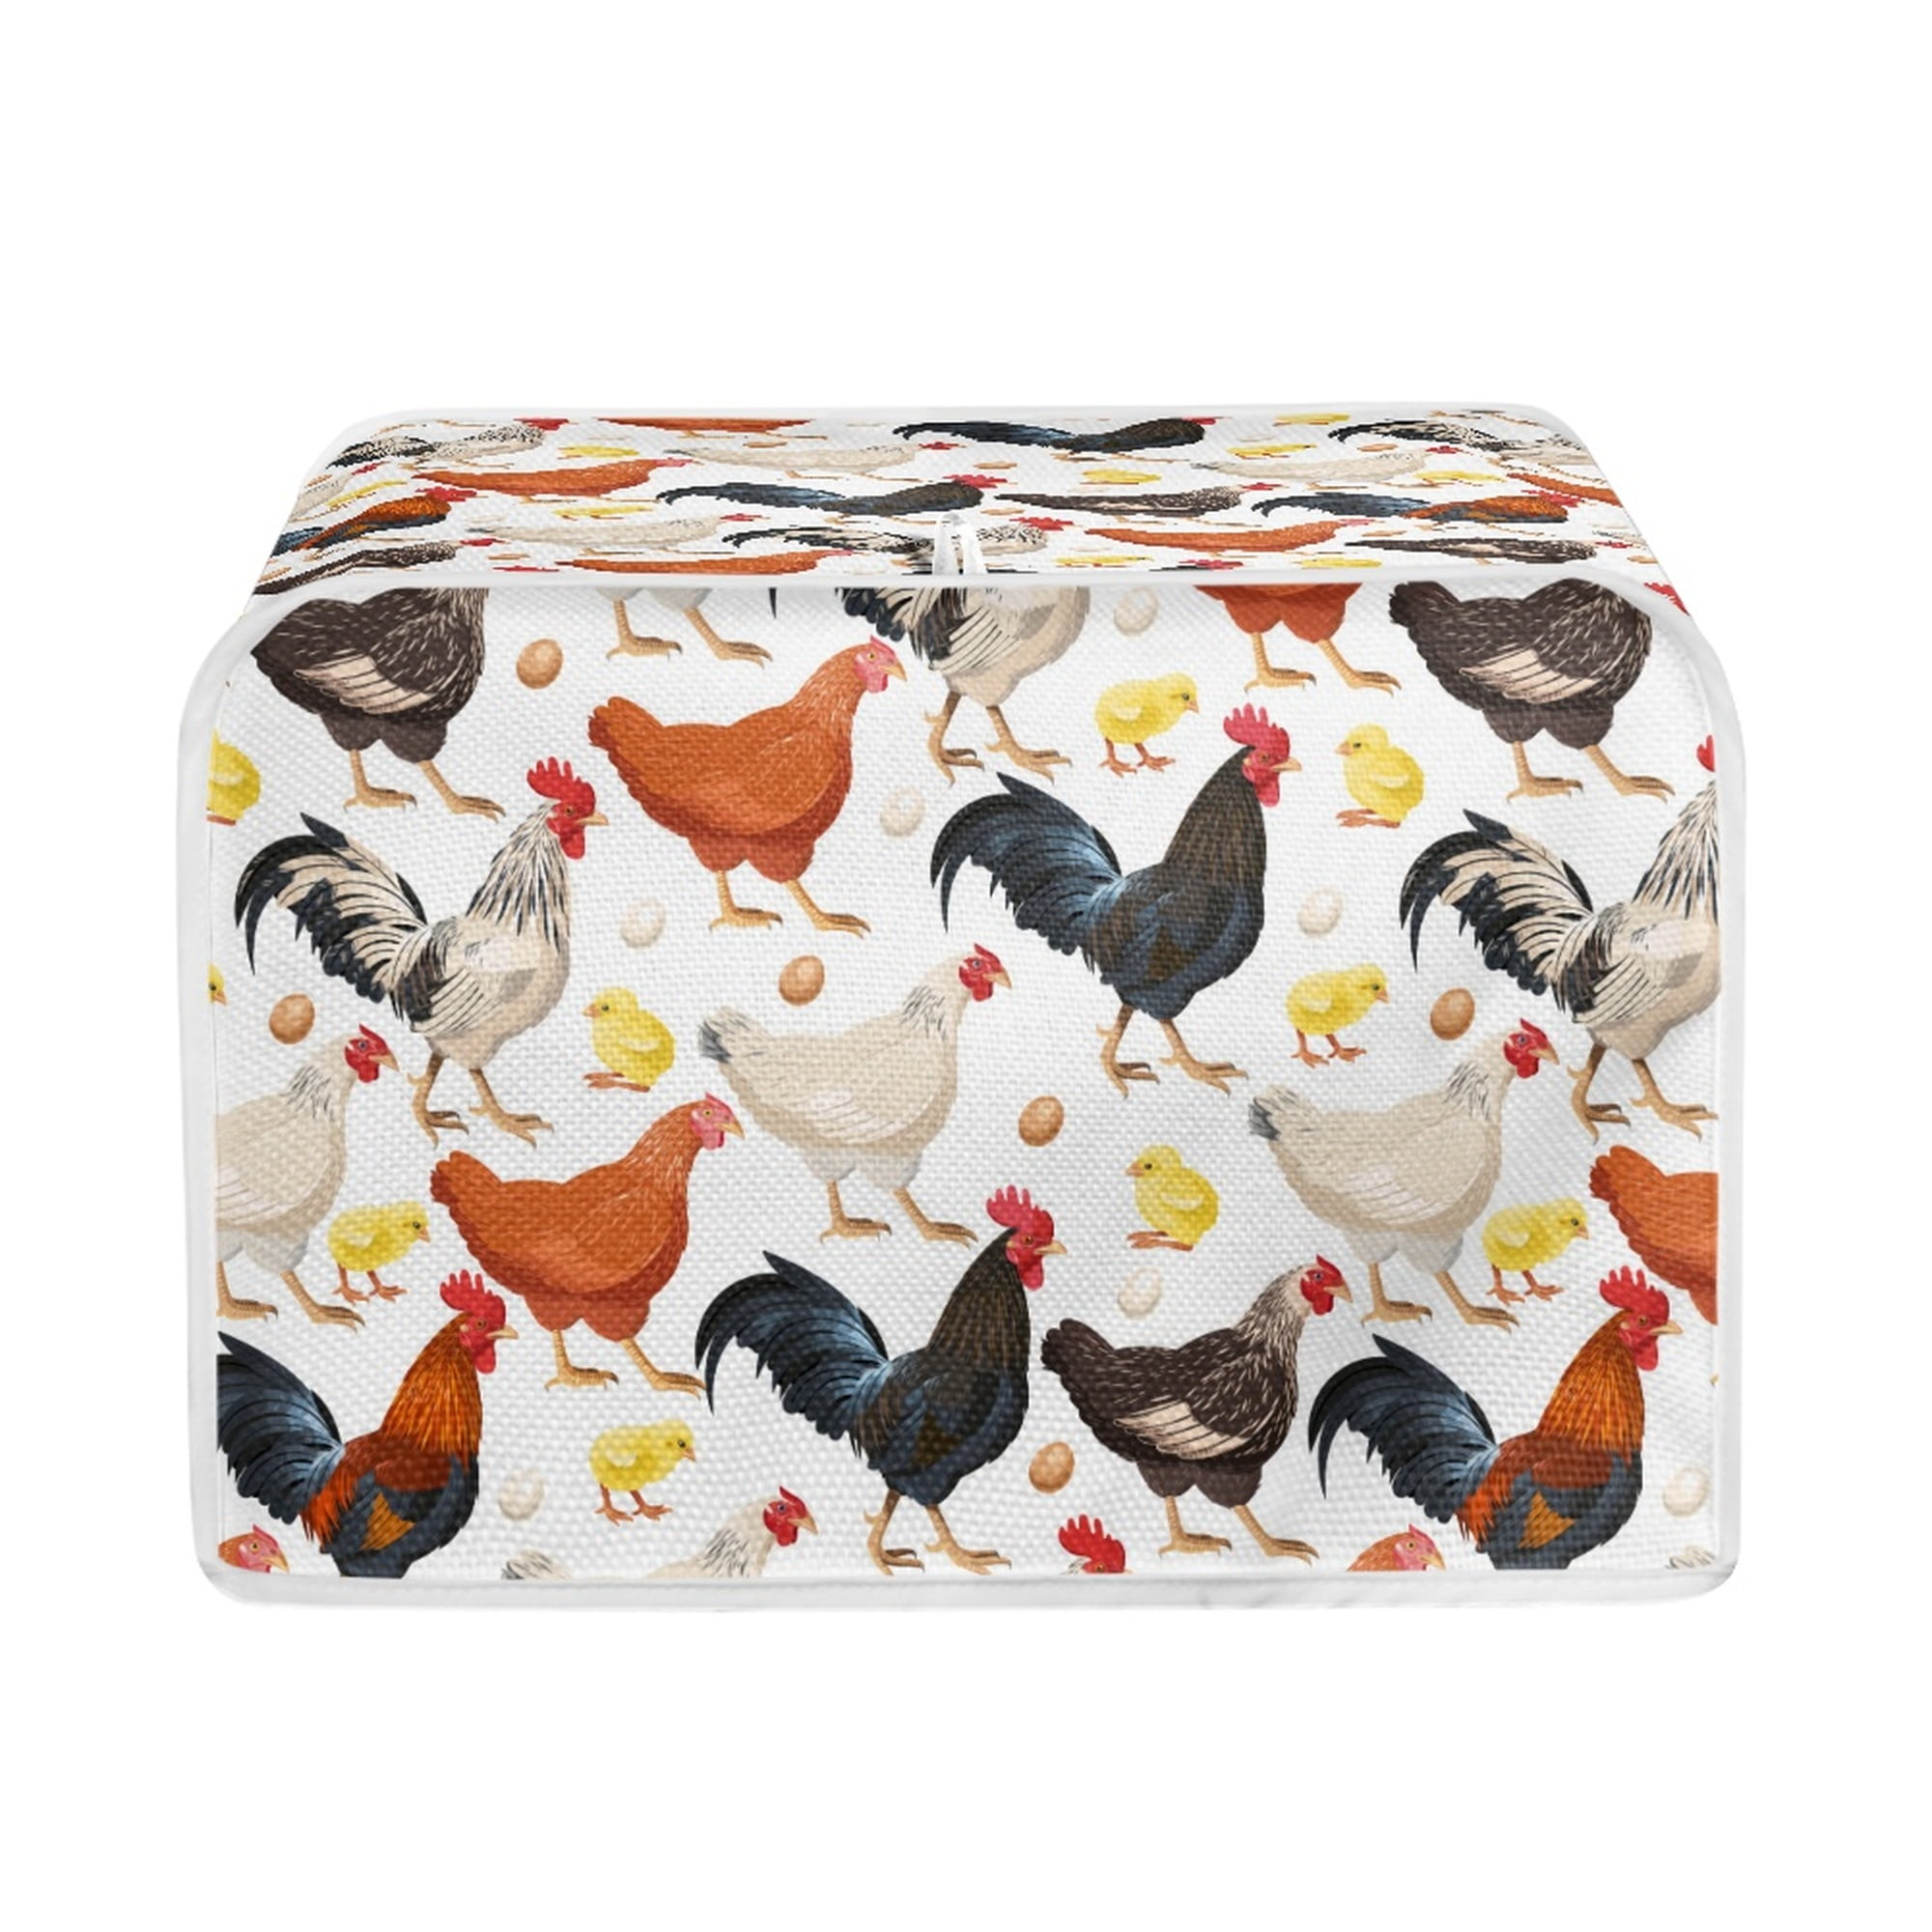 Upetstory Chicken Rooster Air Fryer Cover Dust Cover Red Kicthen Appliance  Cover Countertop Oven Cover Airfryer Covers with Storage Pocket and Handle